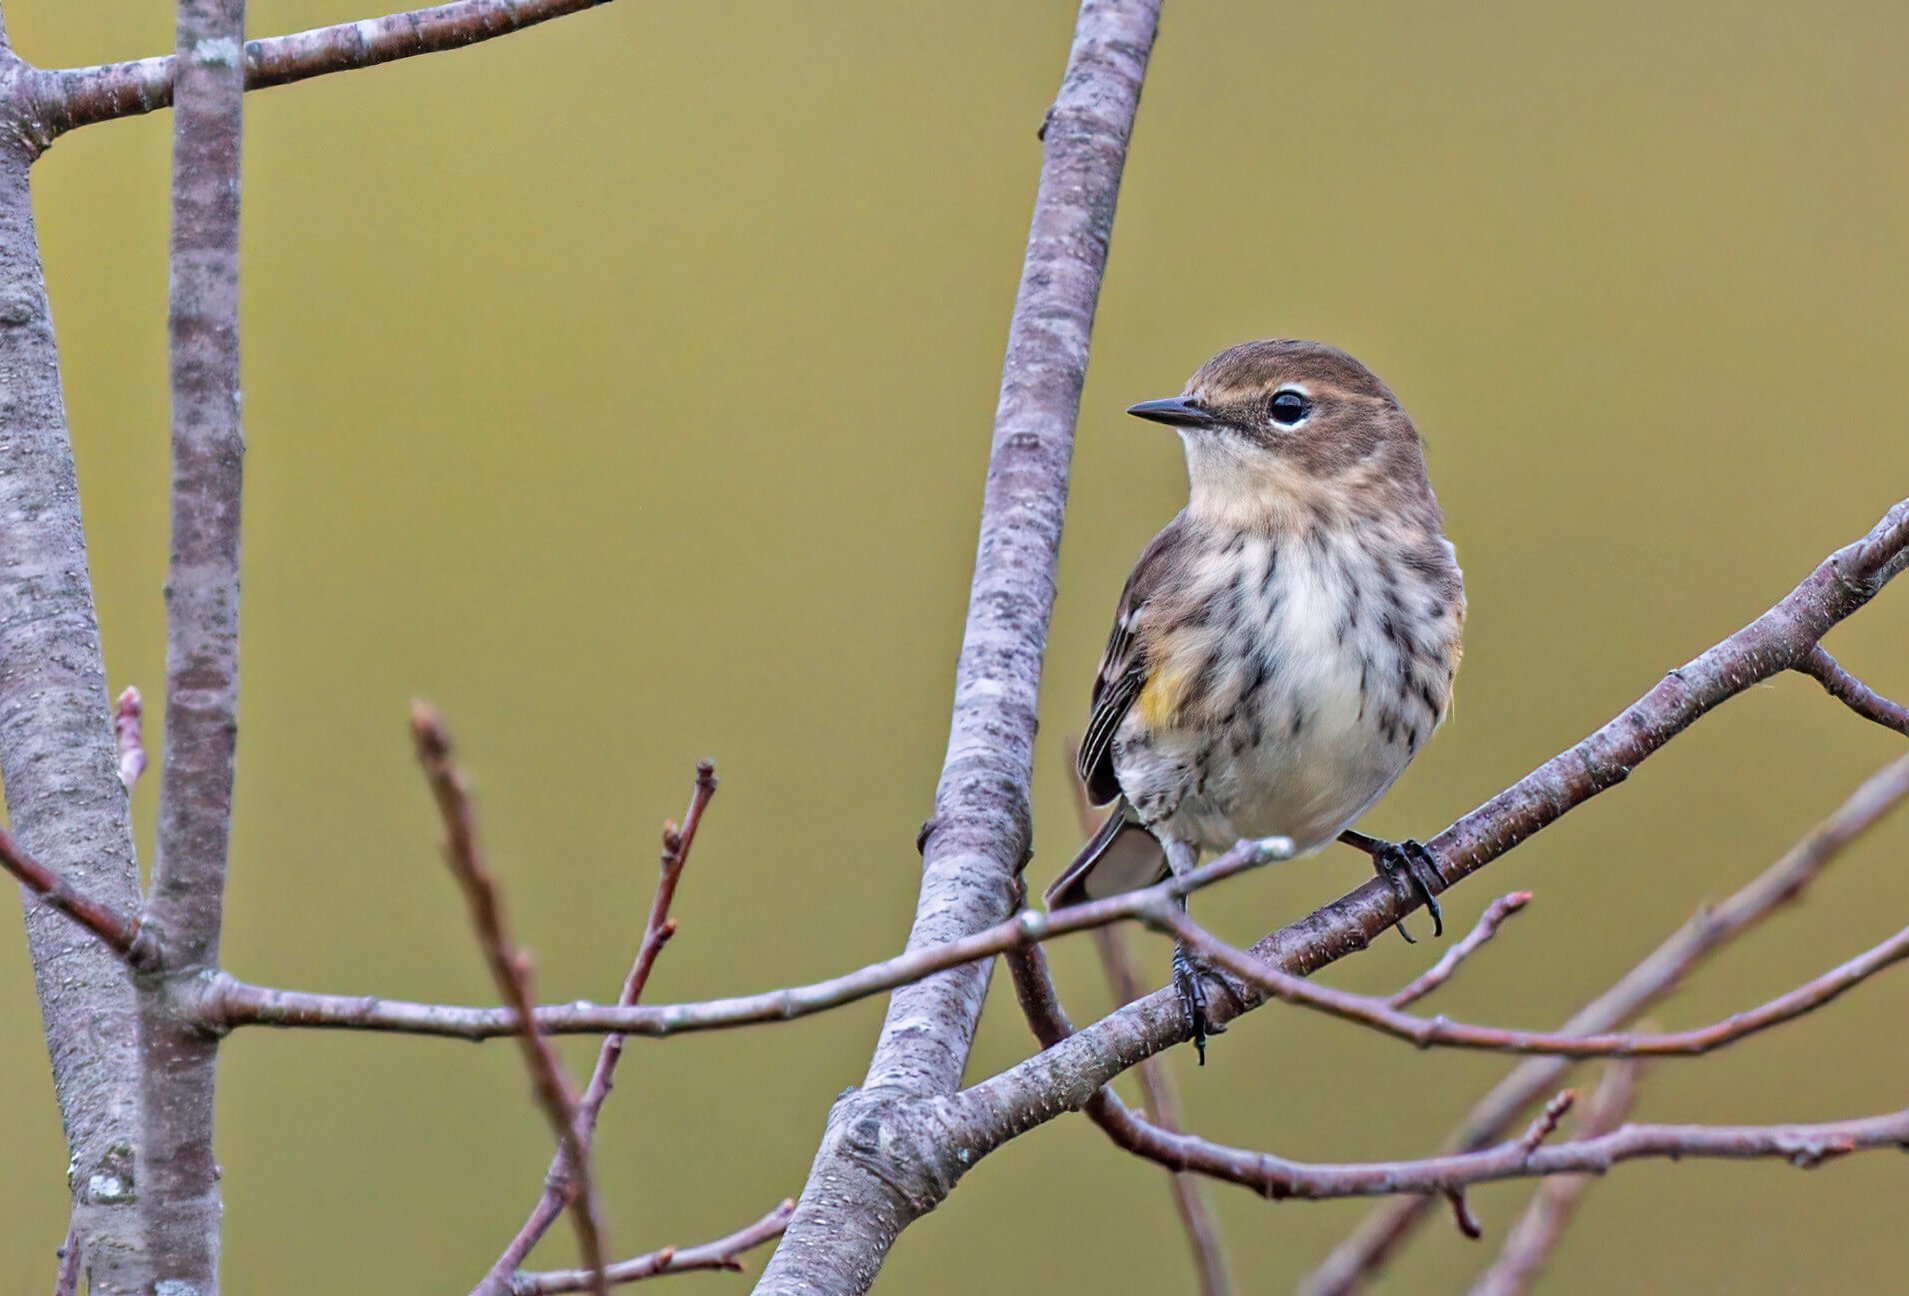 Yellow-rumped_warbler_Photo_Larry_Hubble_CC BY-NC-ND 2.0